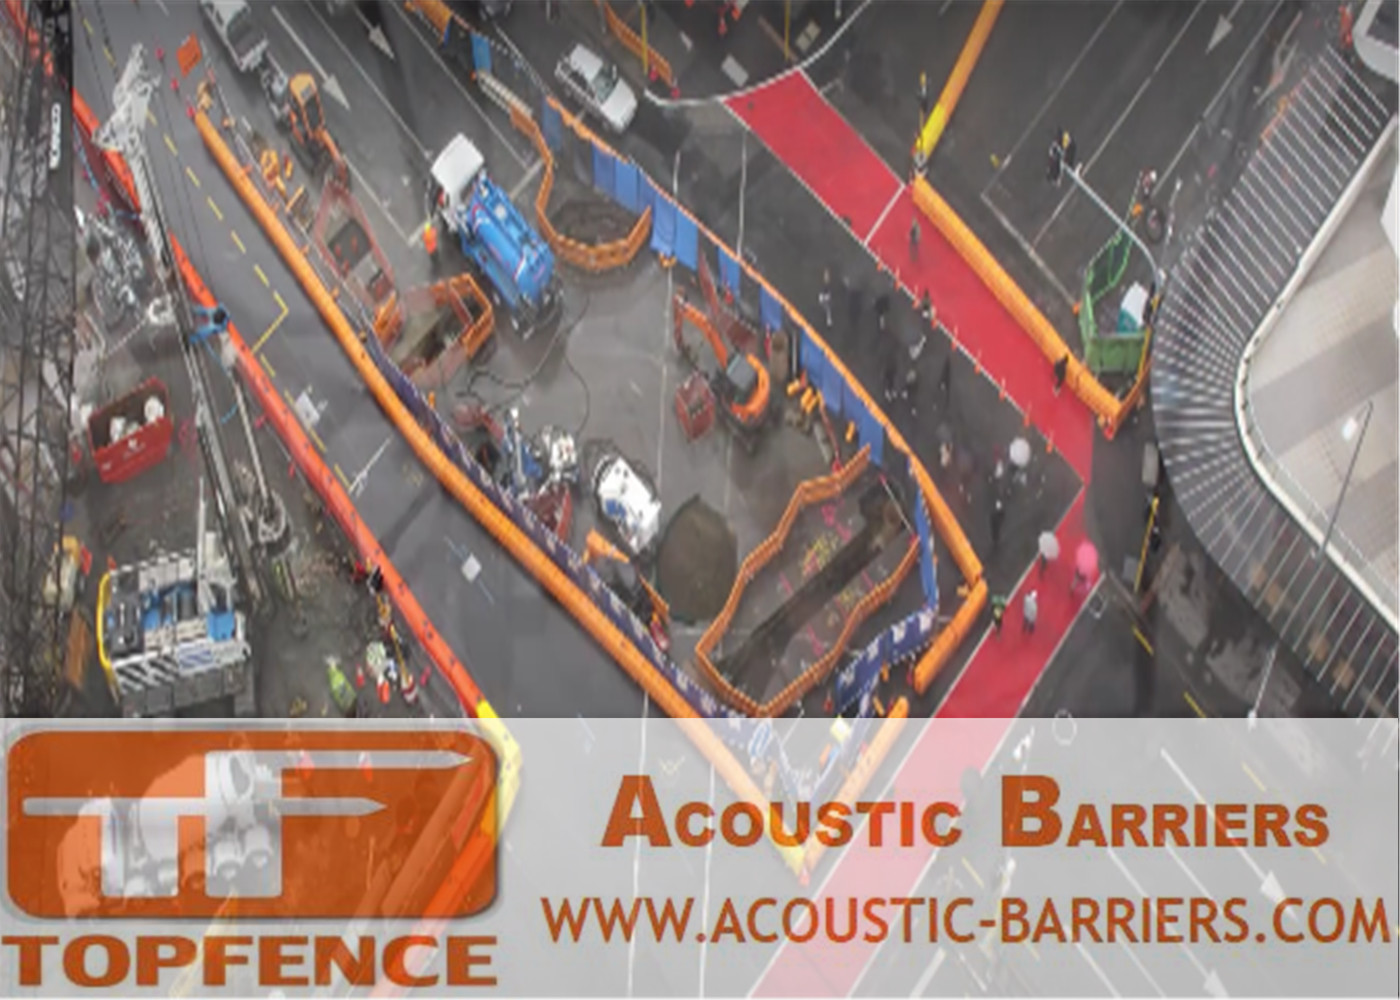  Temporary Sound Barriers Fencing for Construction Site Reduction of Noise to Protect Worker Health Manufactures